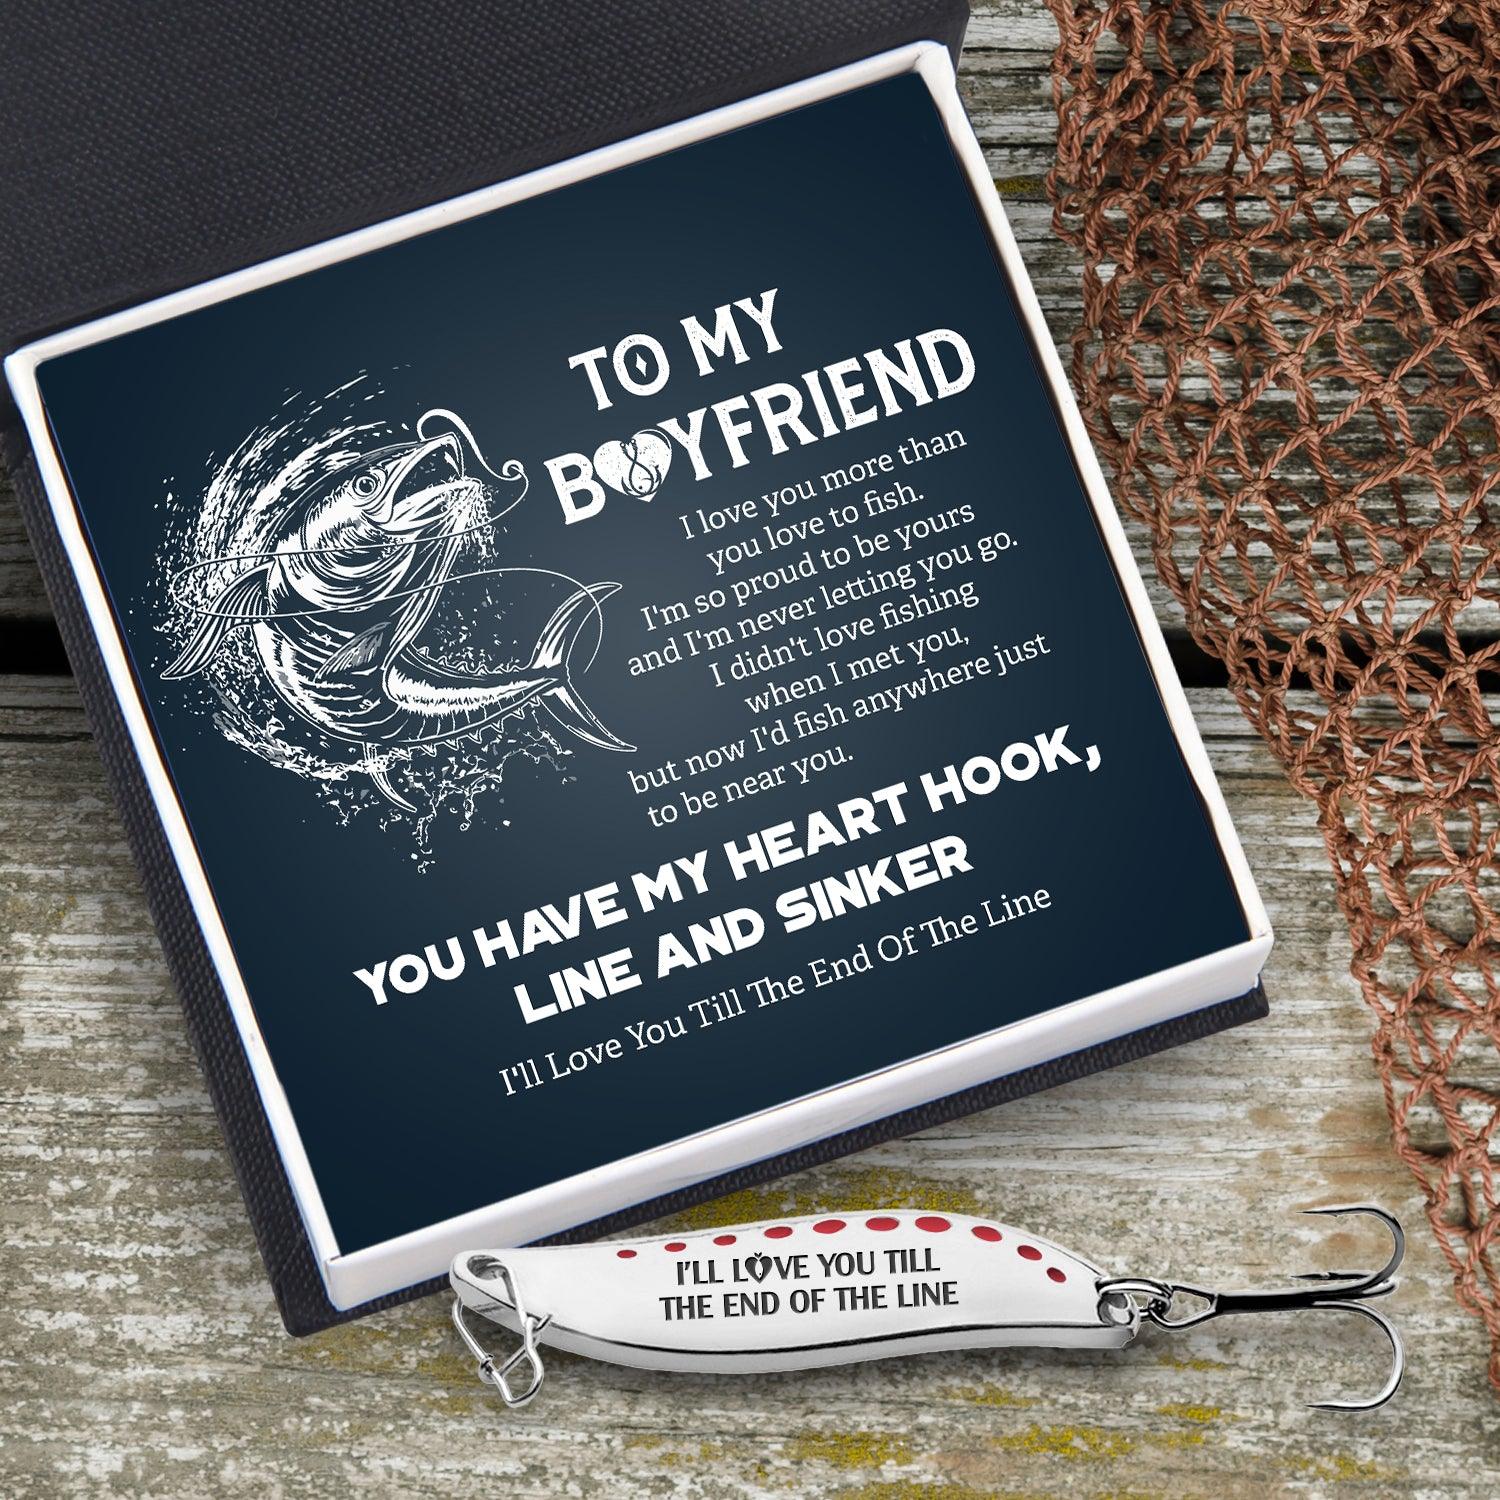 Fishing Spoon Lure - Fishing - To My Boyfriend - I Love You More Than You Love To Fish - Augfaa12001 - Gifts Holder